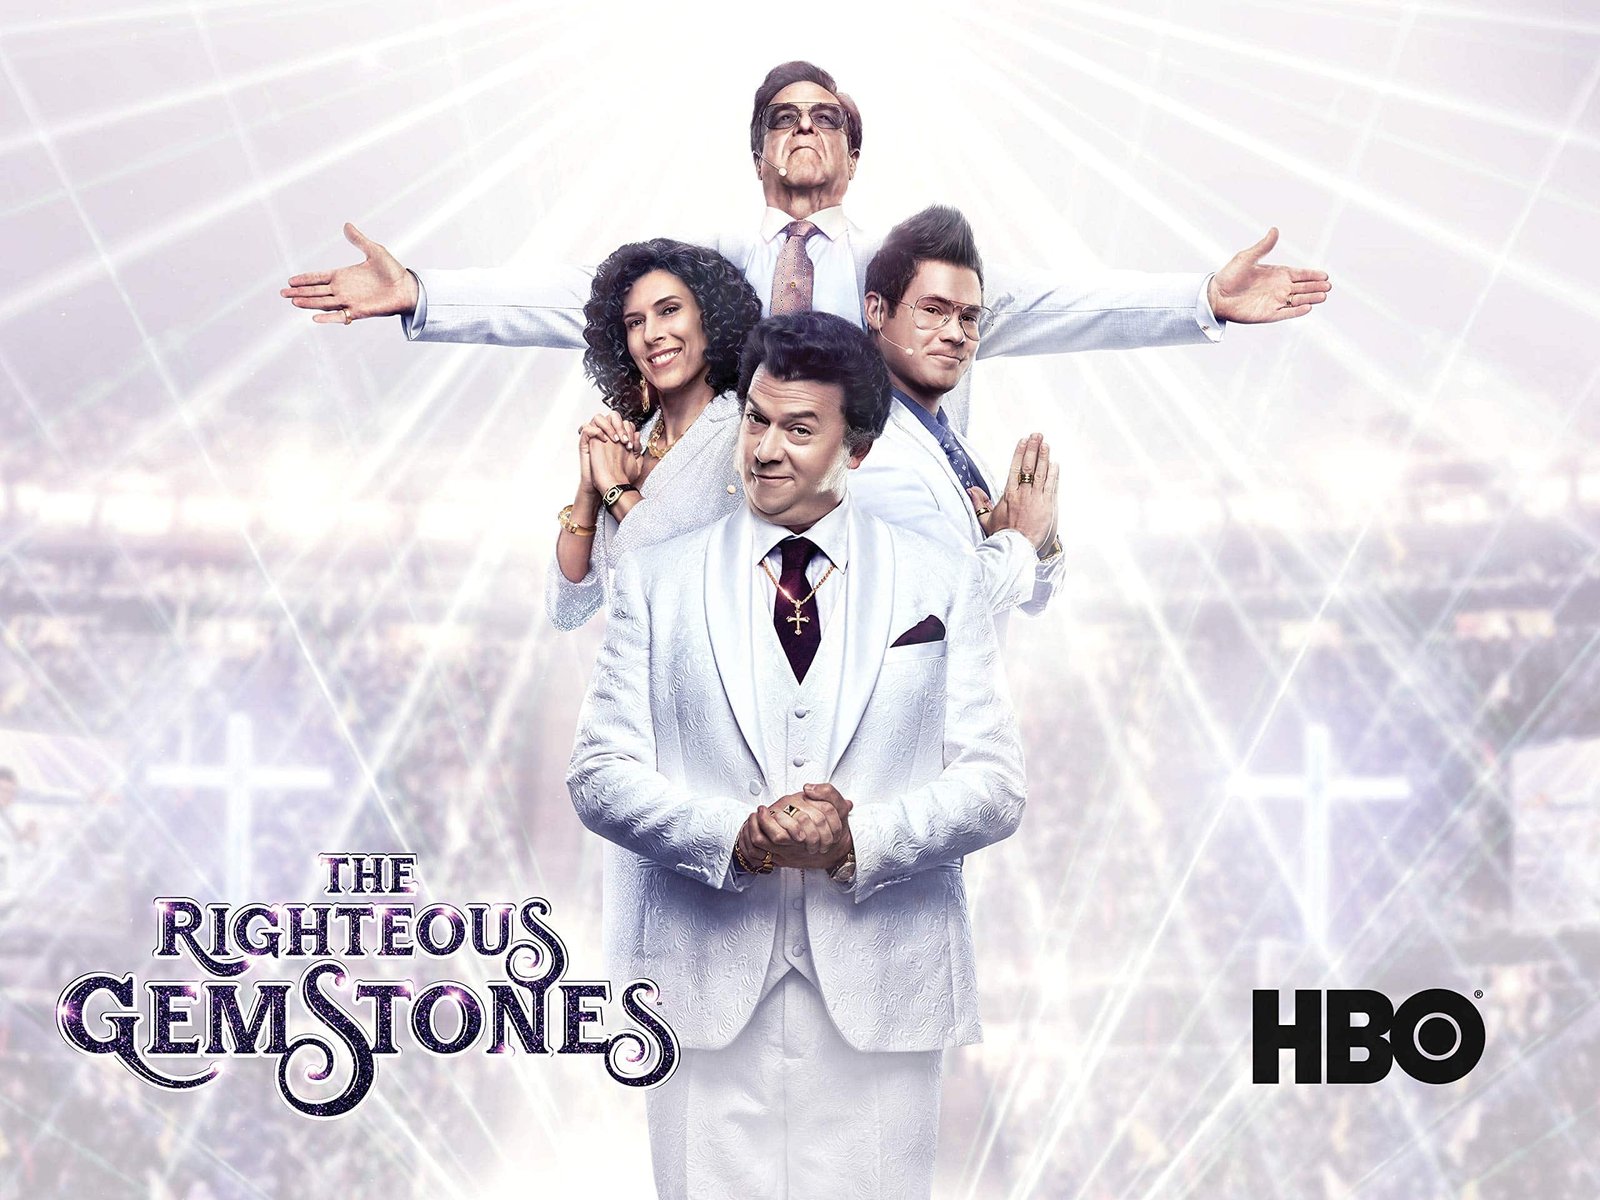 Is there a season 3 of The Righteous Gemstones?